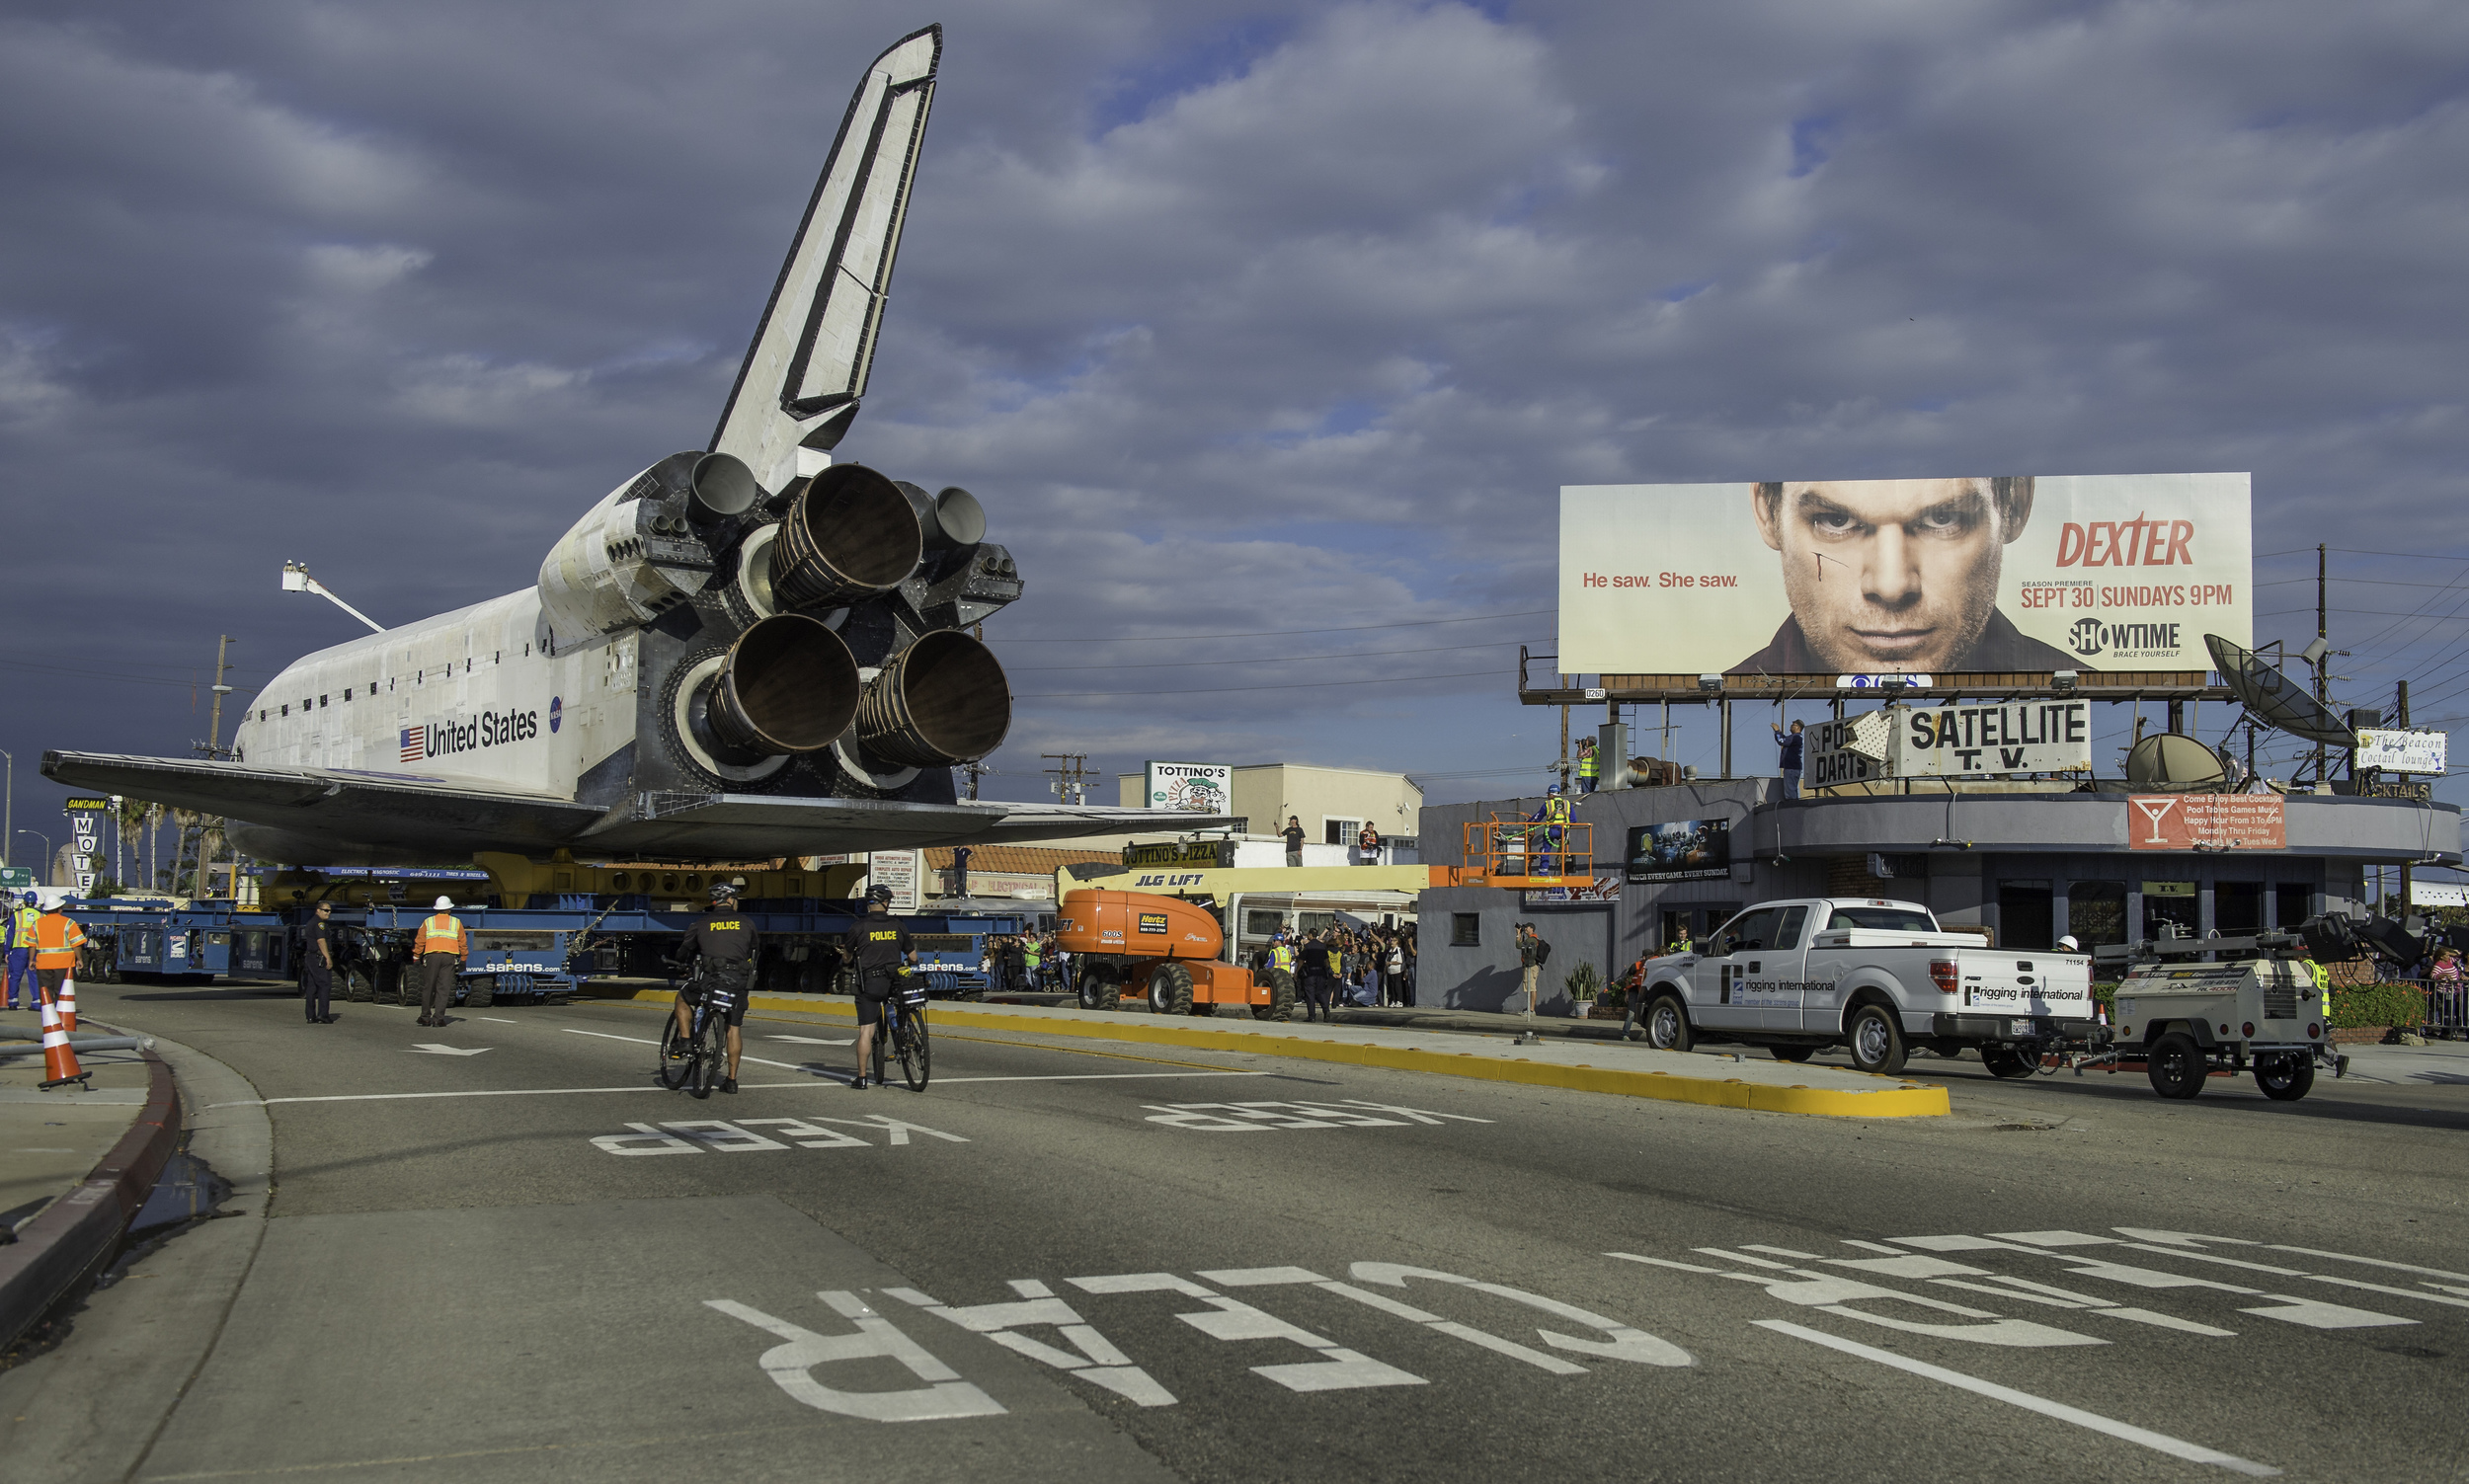  The space shuttle Endeavour is seen as it traverses through Inglewood, California on Friday, Oct. 12, 2012. Endeavour, built as a replacement for space shuttle Challenger, completed 25 missions, spent 299 days in orbit, and orbited Earth 4,671 times